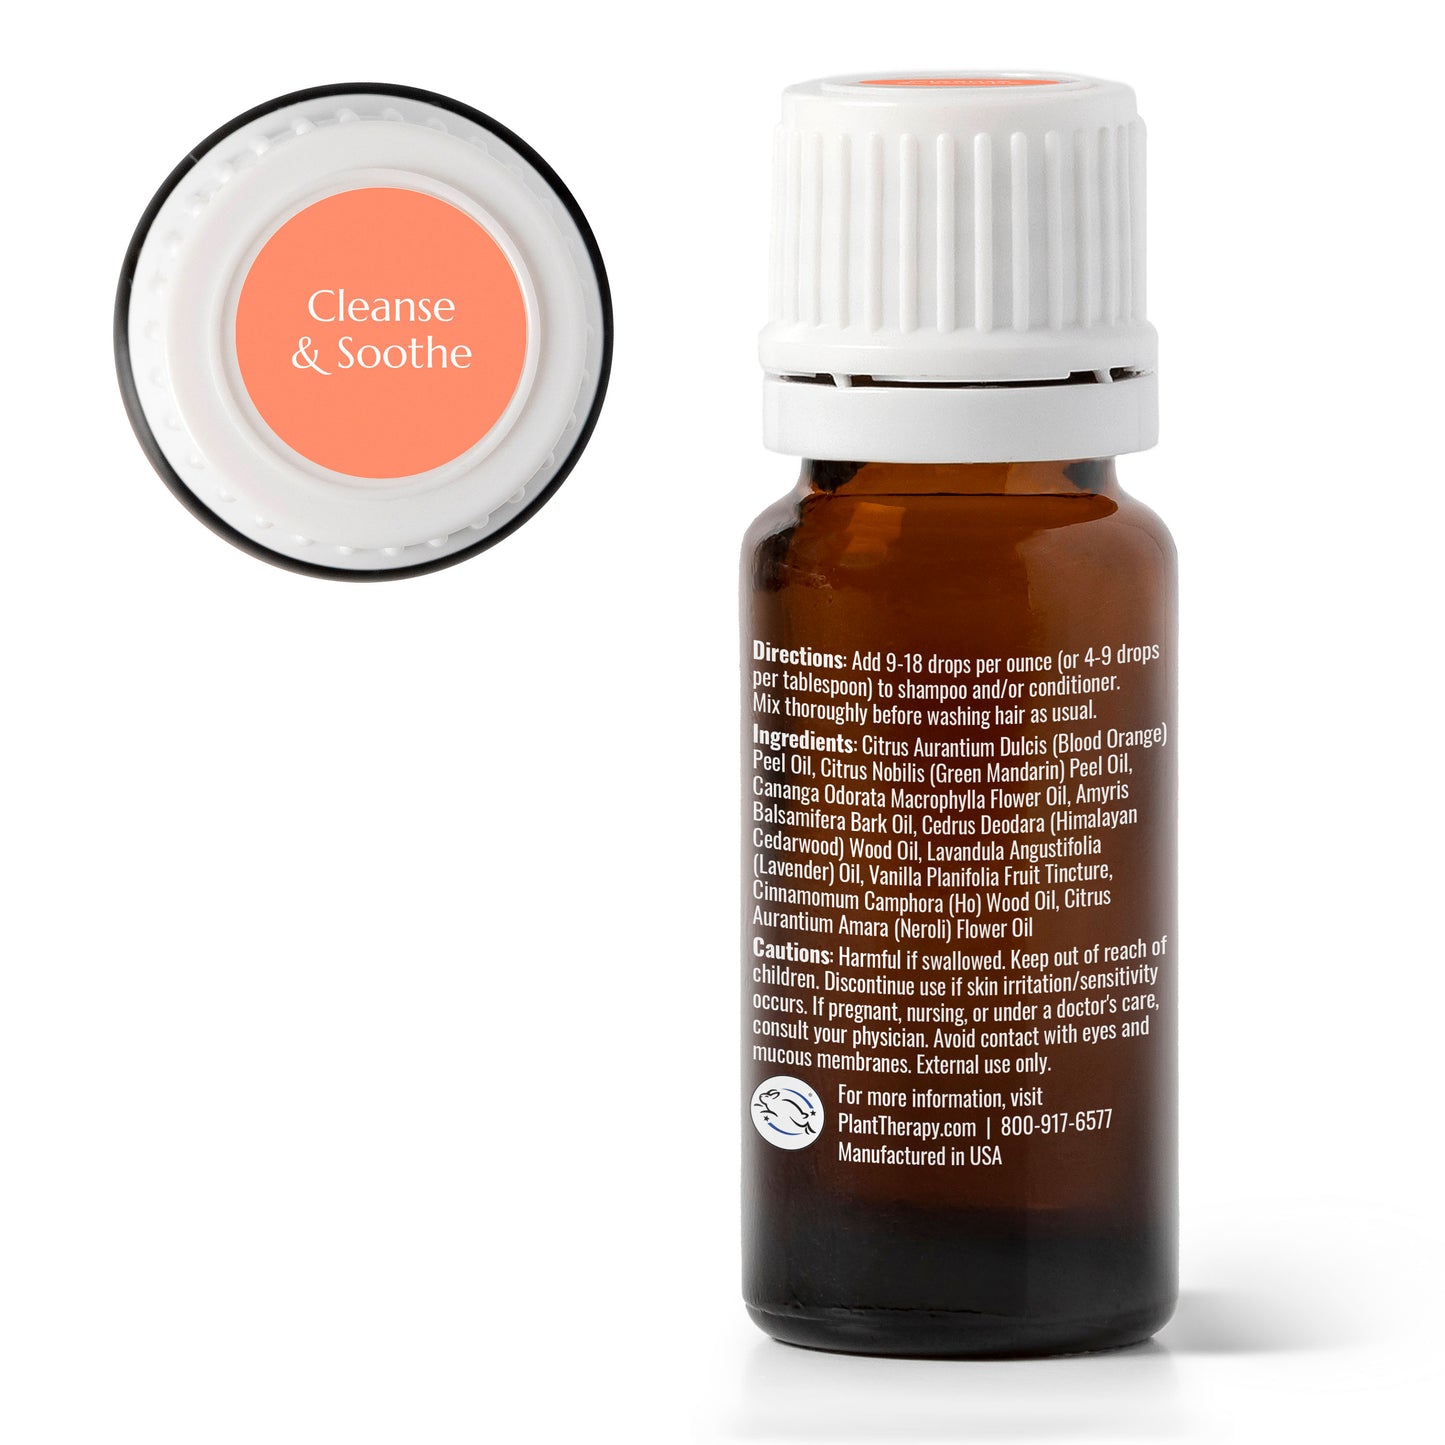 Hair Therapy Cleanse & Soothe Essential Oil Blend